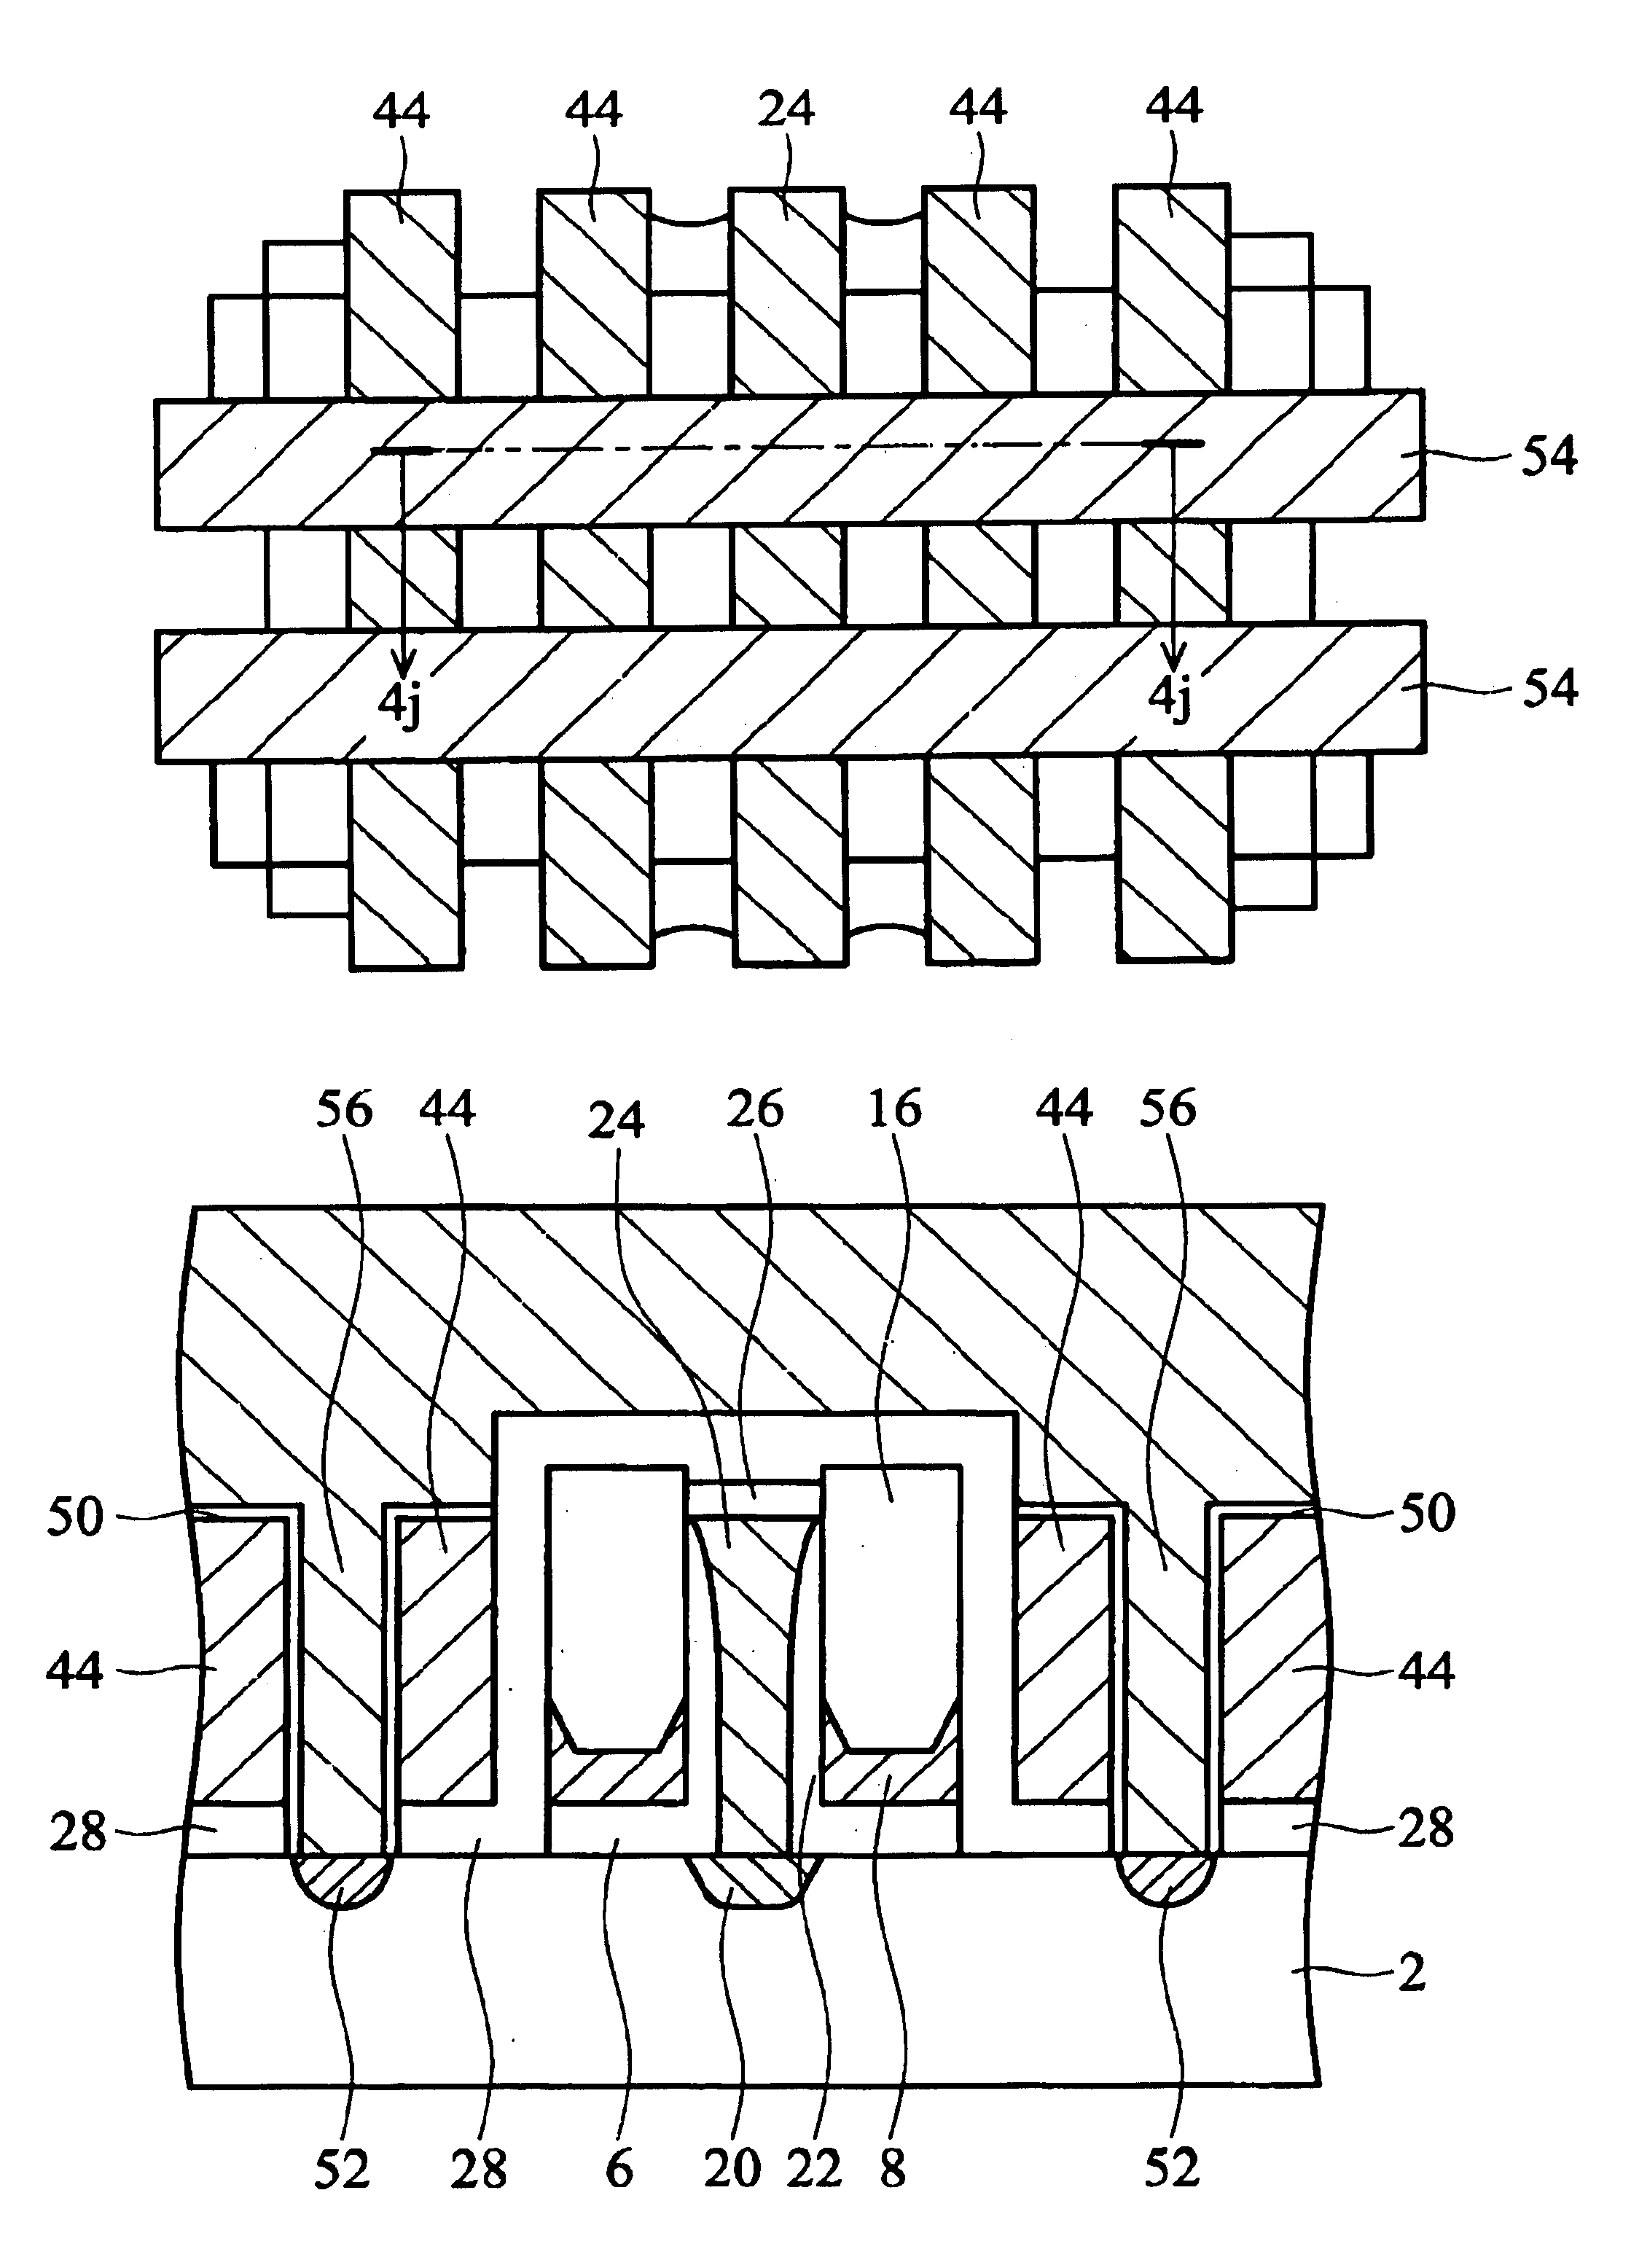 Structure and fabricating method with self-aligned bit line contact to word line in split gate flash